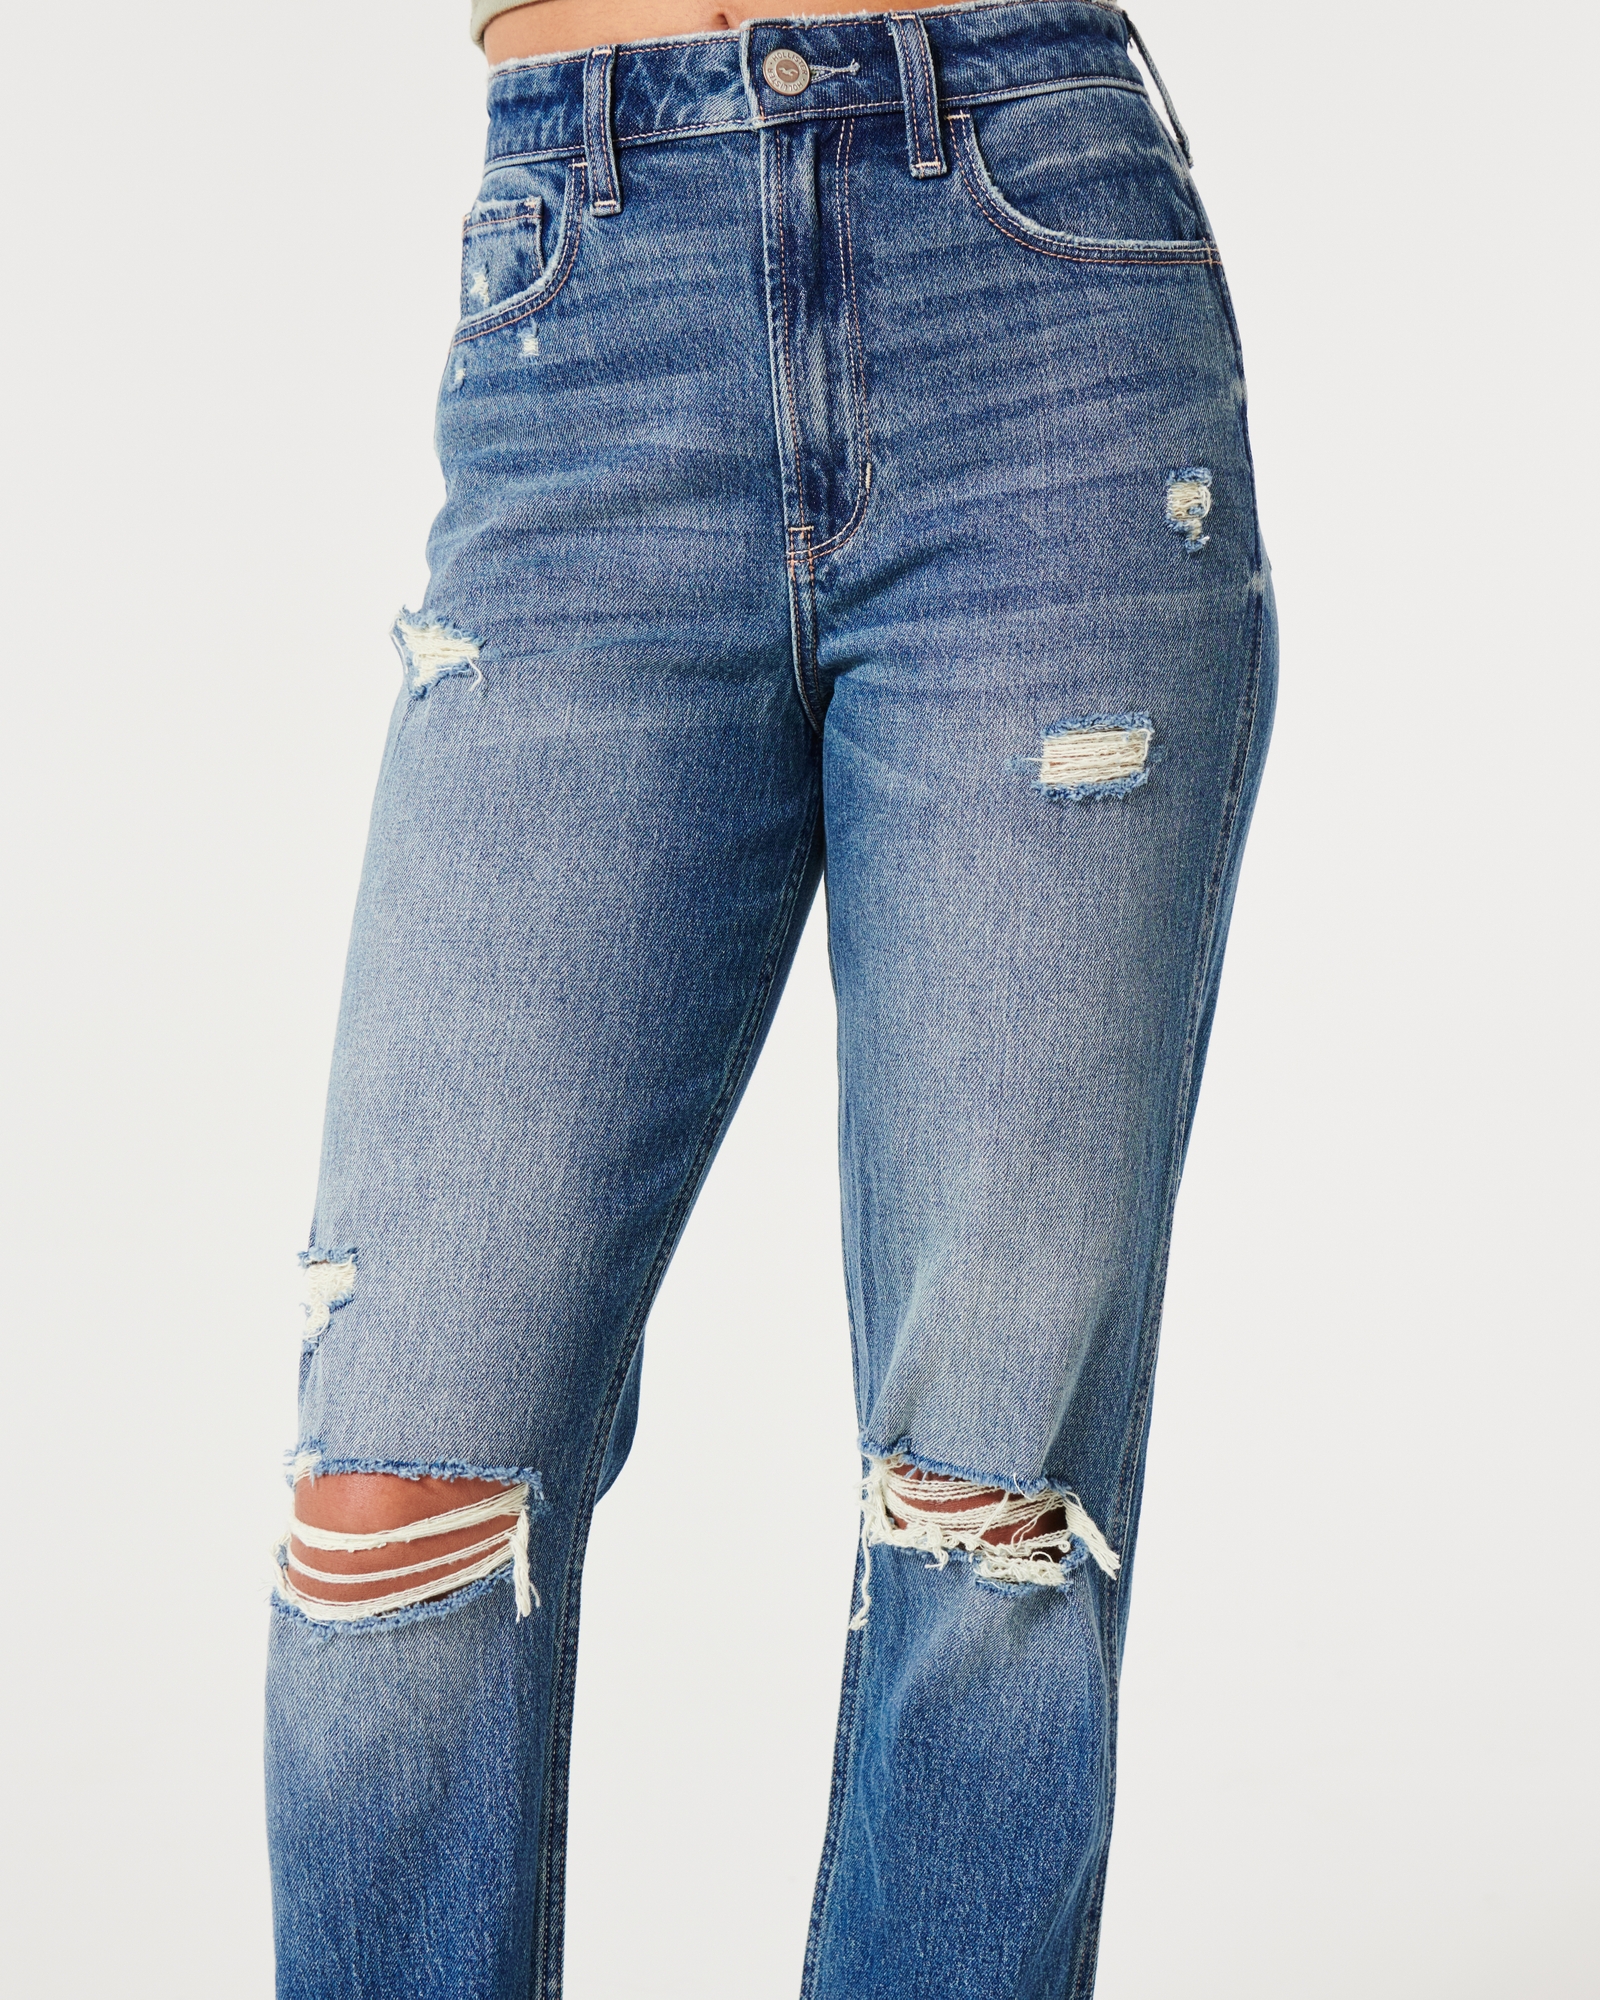 Women's Ultra High-Rise Ripped Medium Wash Mom Jeans